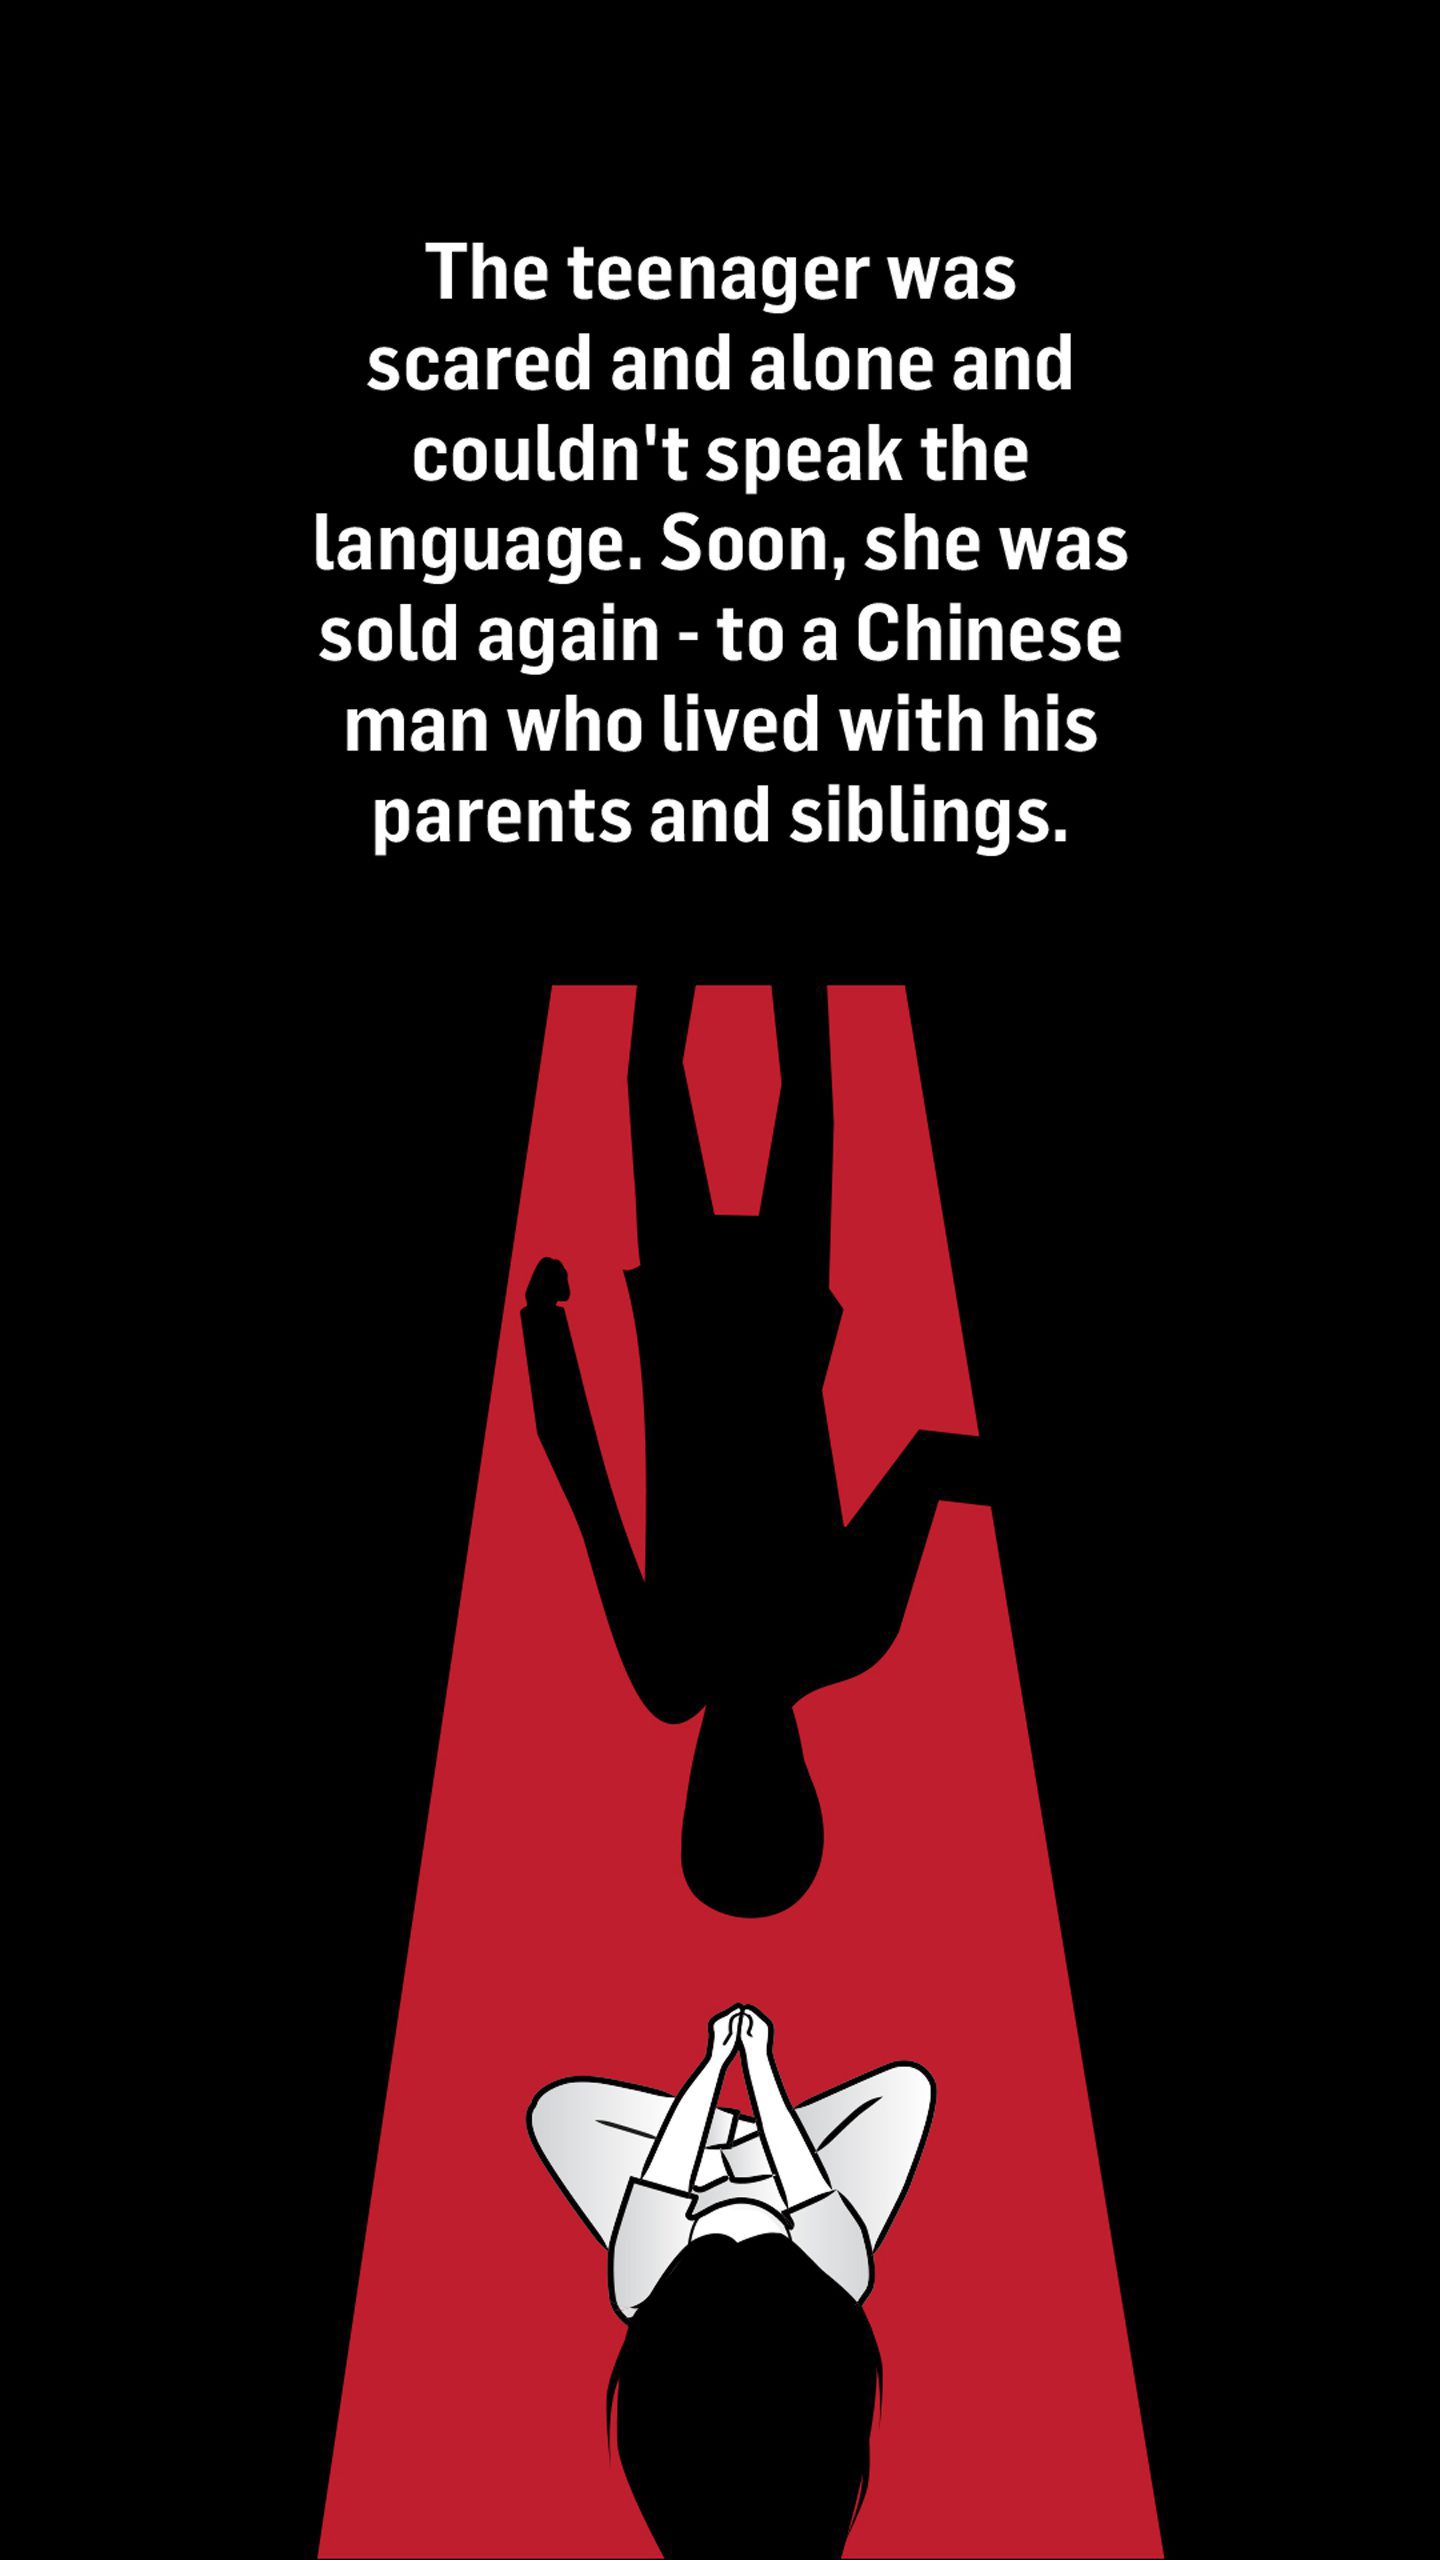 A woman sitting on the floor and the shadow of a man in the doorway light. Text above the image reads: The teenager was scared and alone and couldn't speak the language. Soon, she was sold again - to a Chinese man who lived with his parents and siblings.